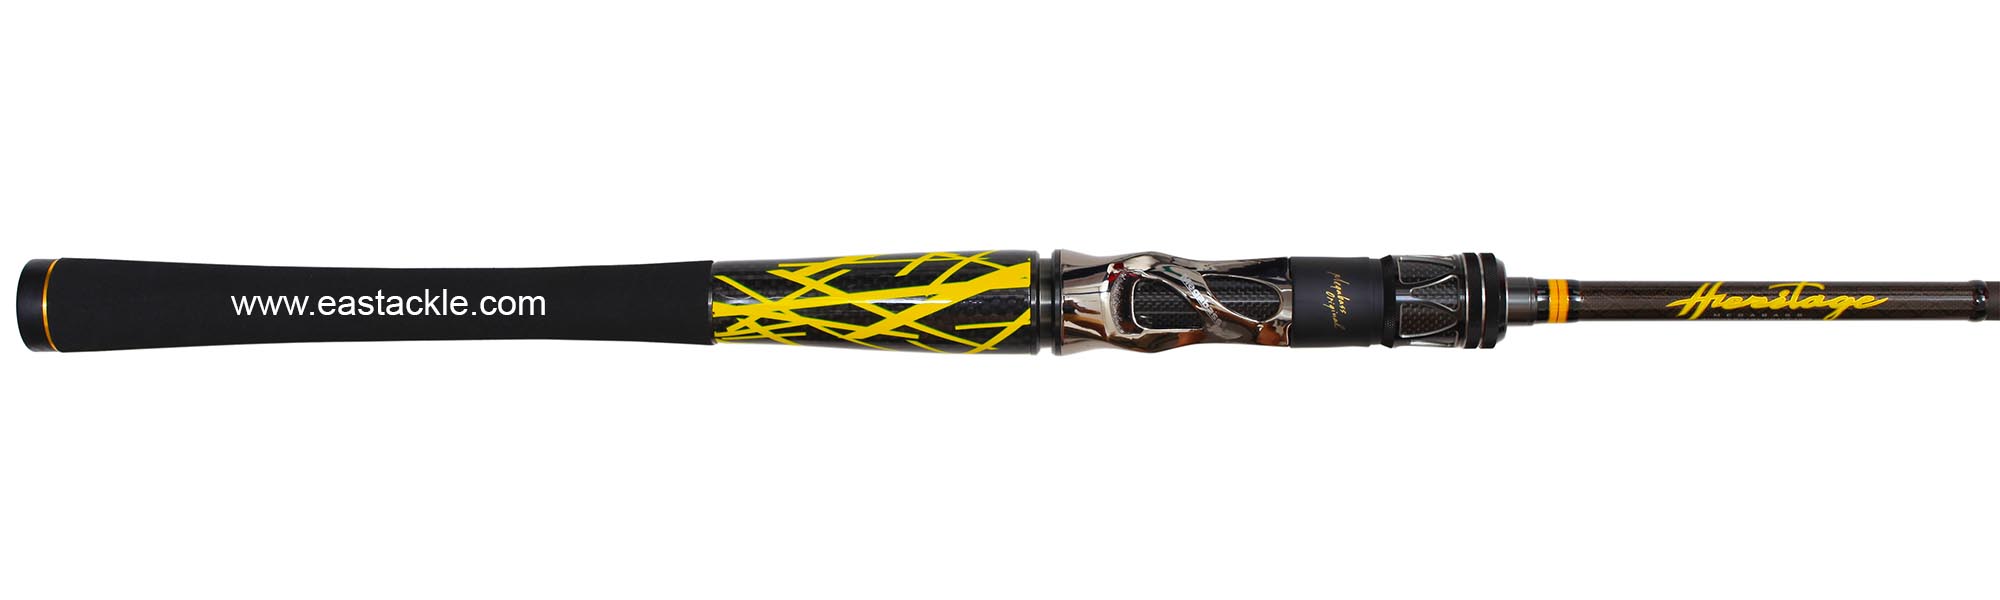 Megabass - Heritage F4-68XHT - Bait Casting Rod - Handle Section (Top View) | Eastackle